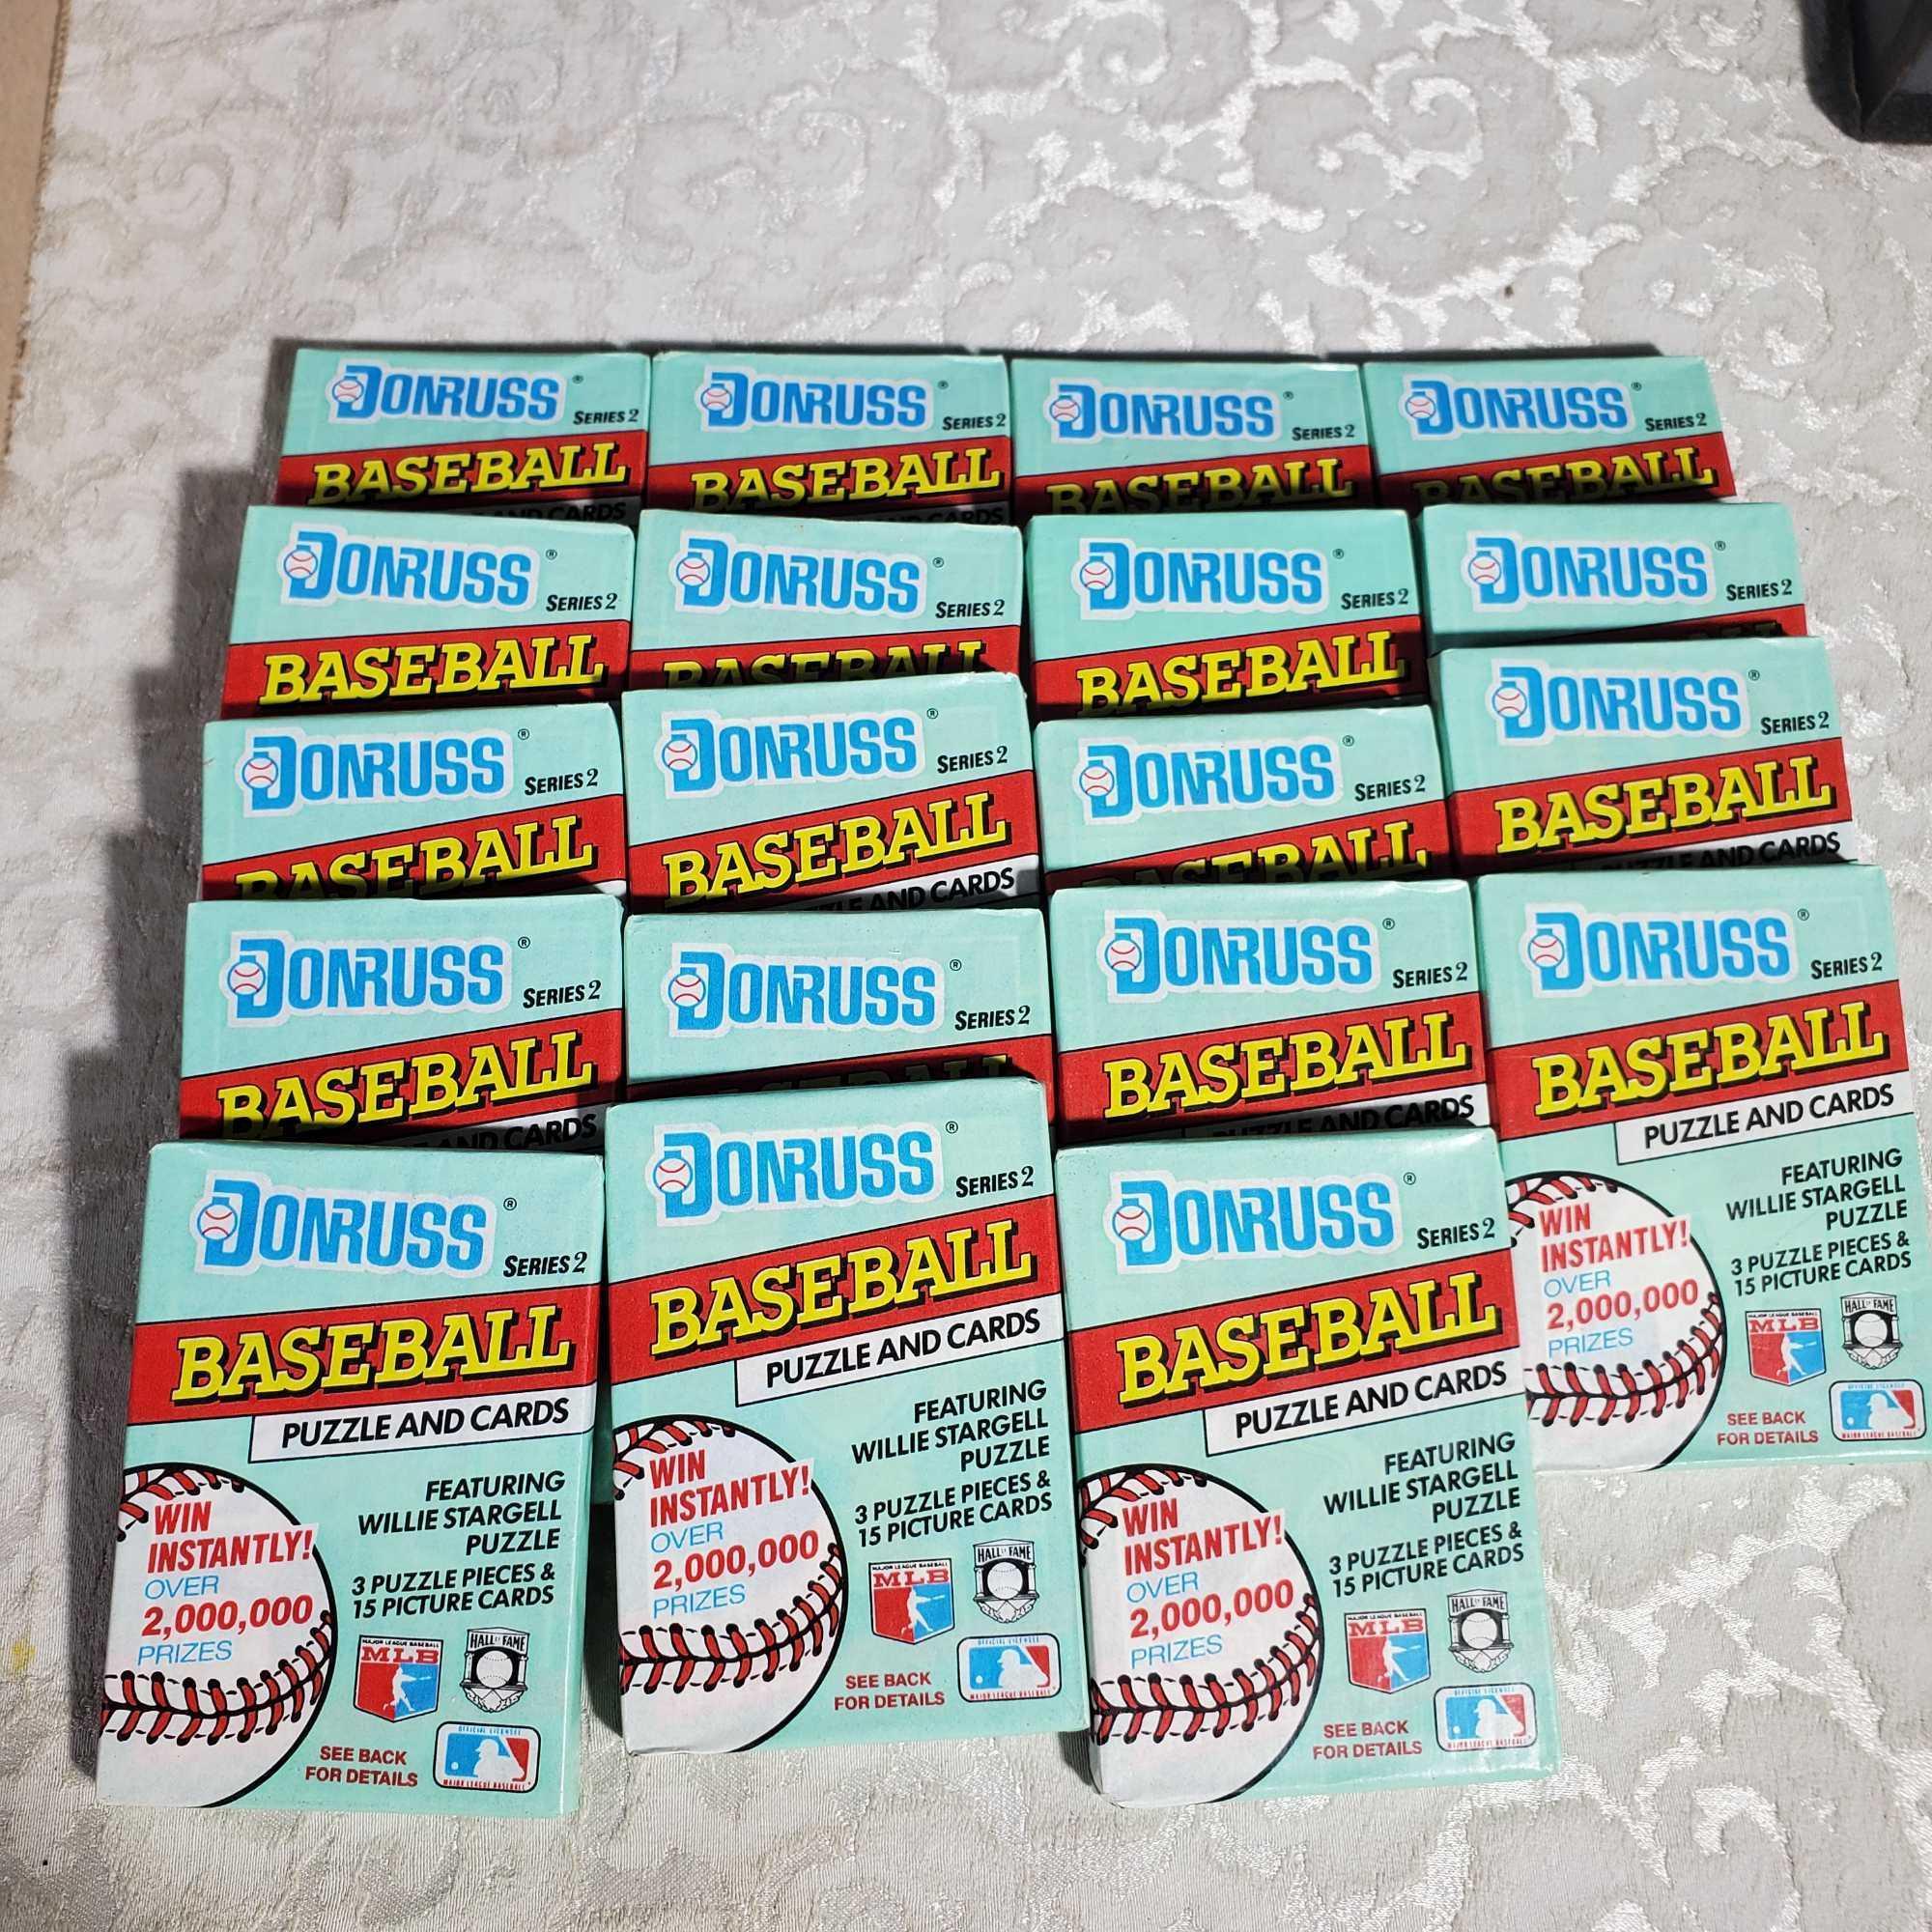 Flat Full of Wax Pack and other Unopened Baseball Packs